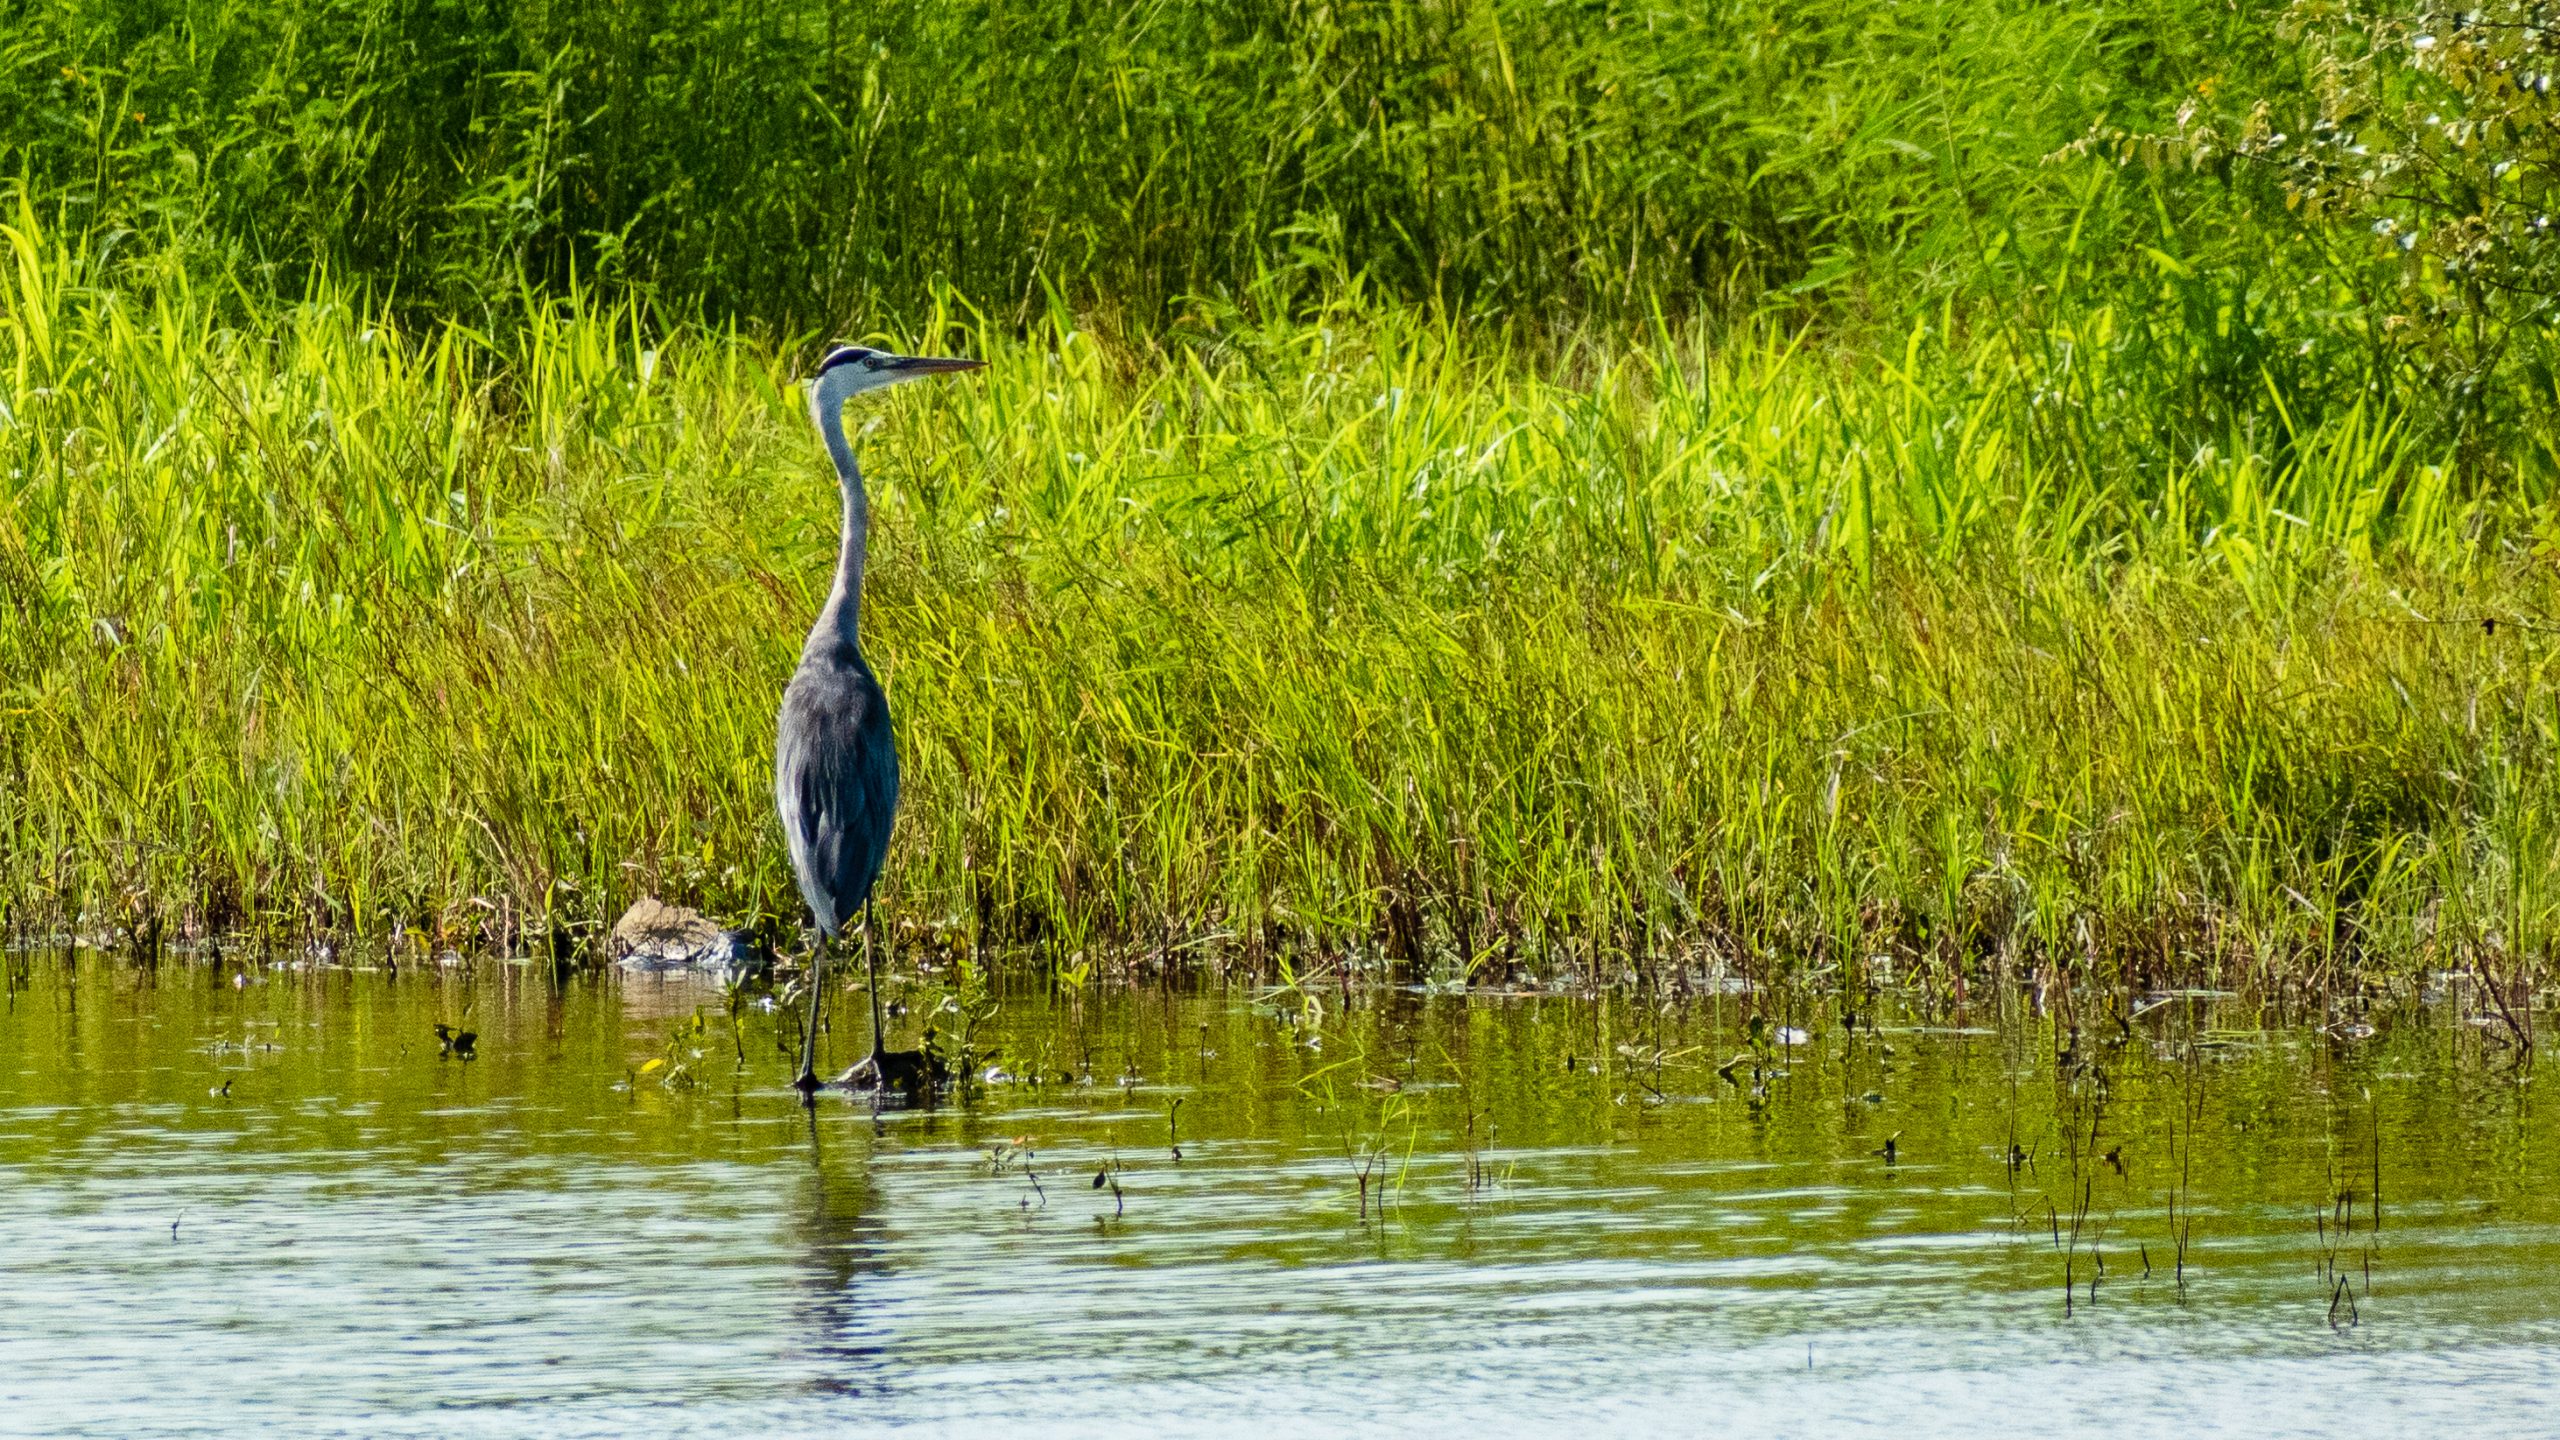 A heron stranded in water